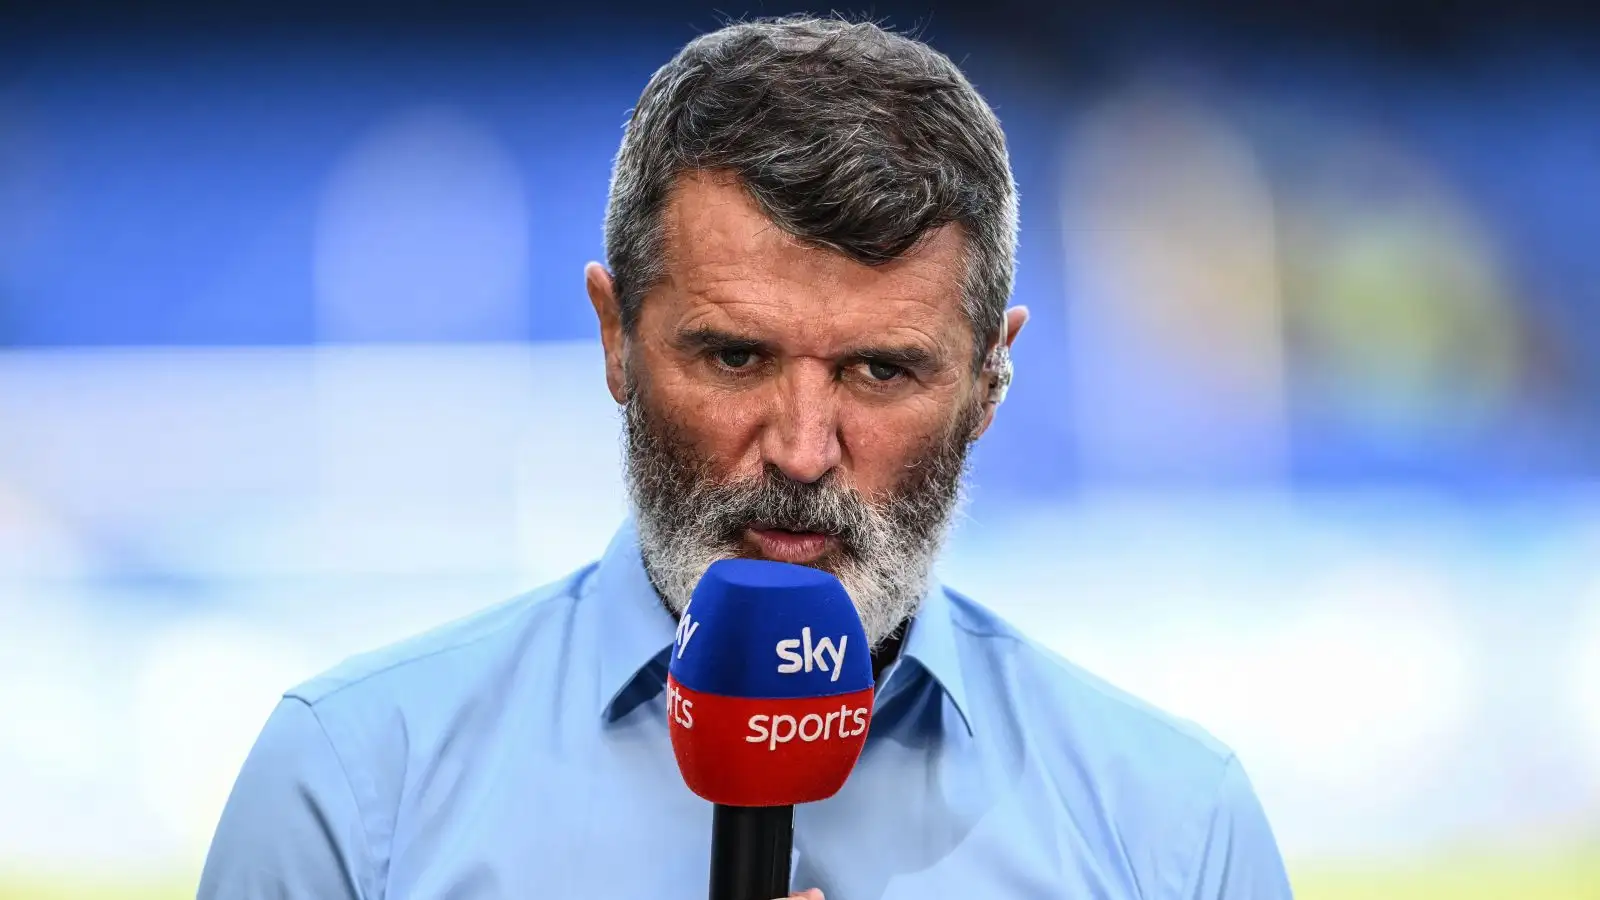 Roy Keane talks about Liverpool and Chelsea